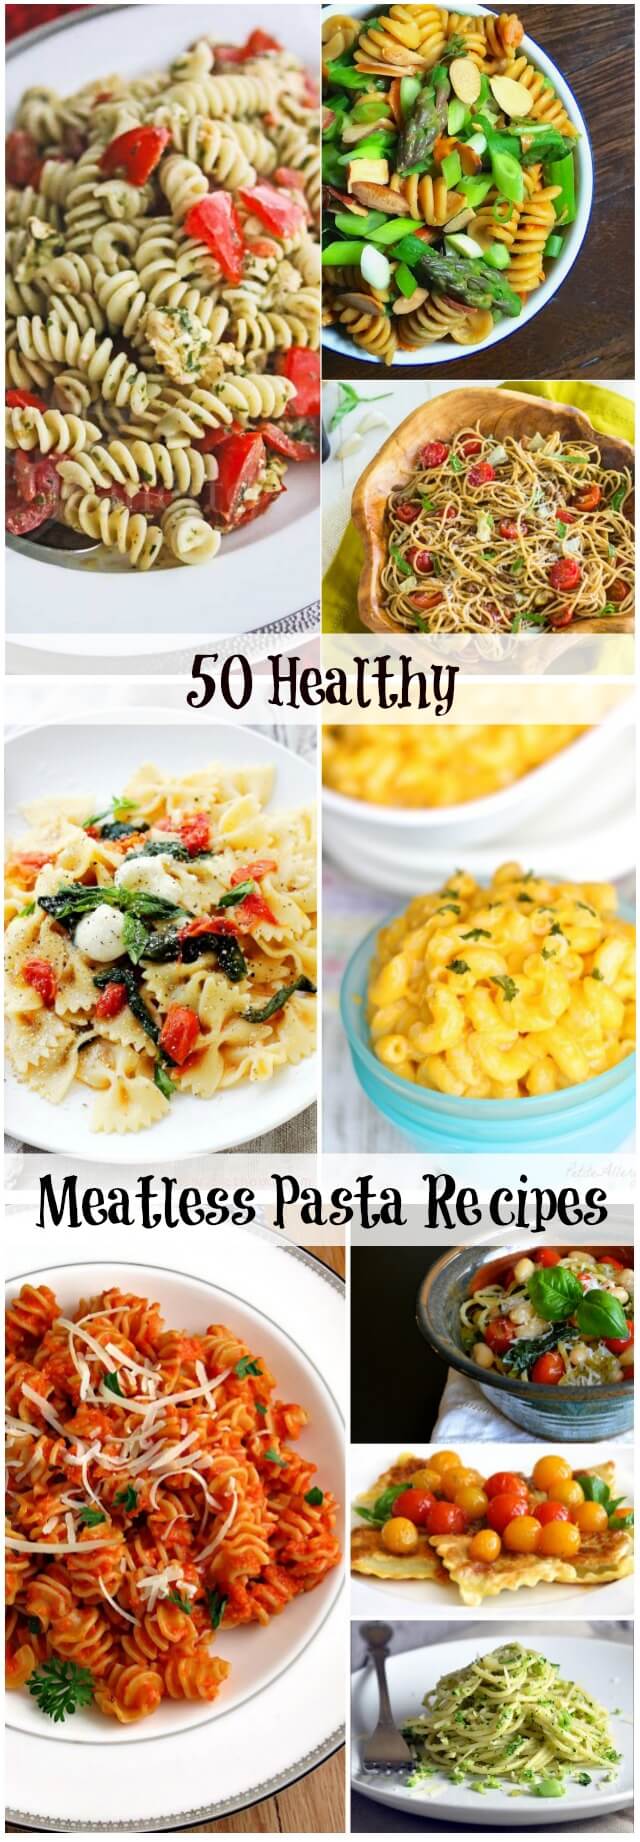 Healthy Meatless Pasta Recipes